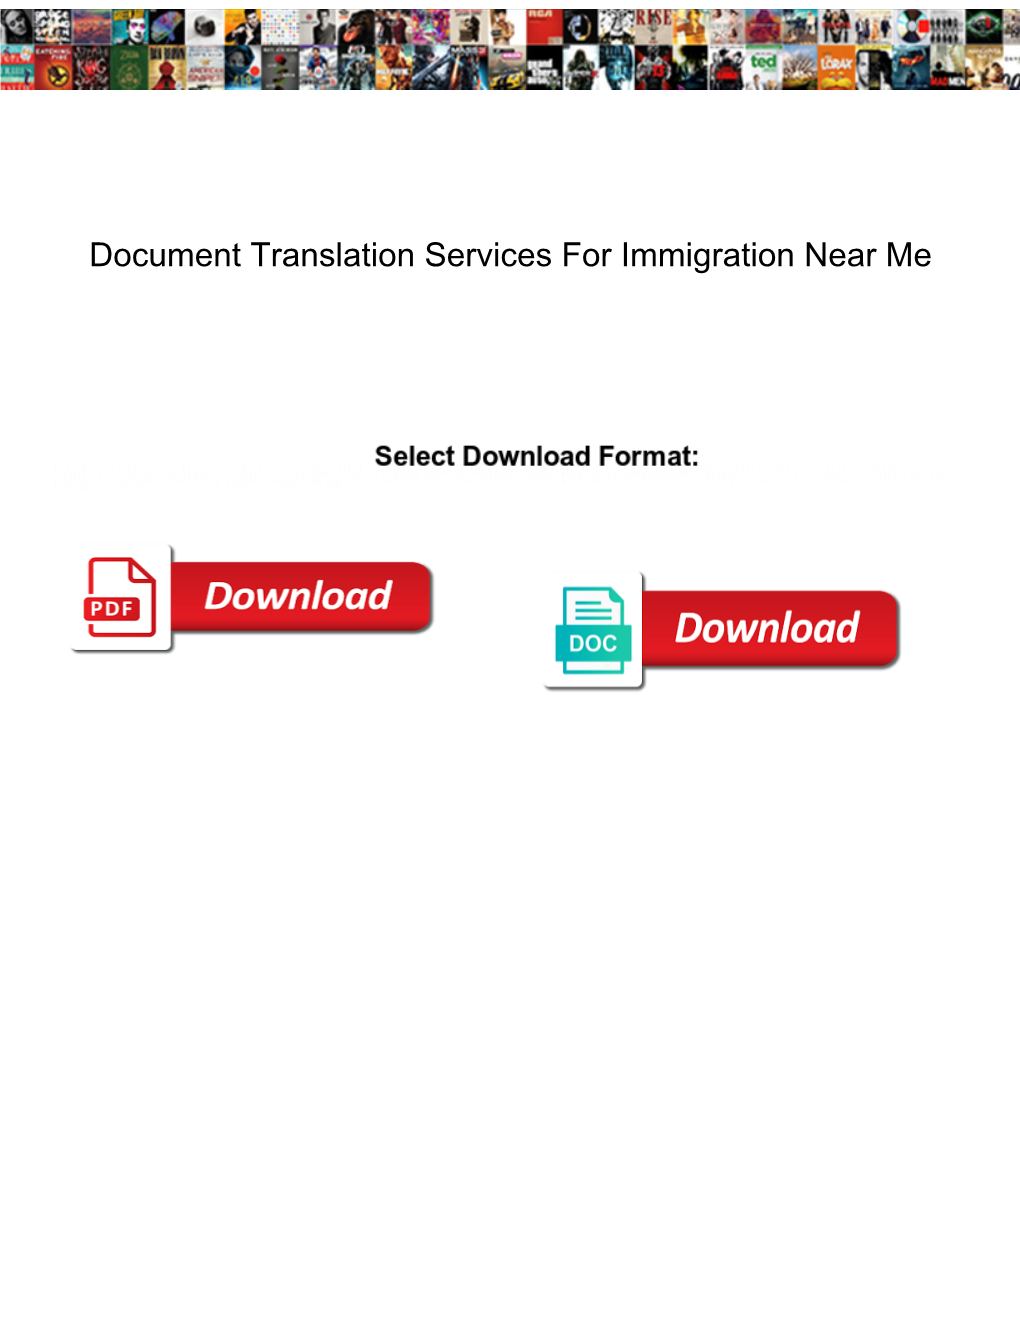 Document Translation Services for Immigration Near Me